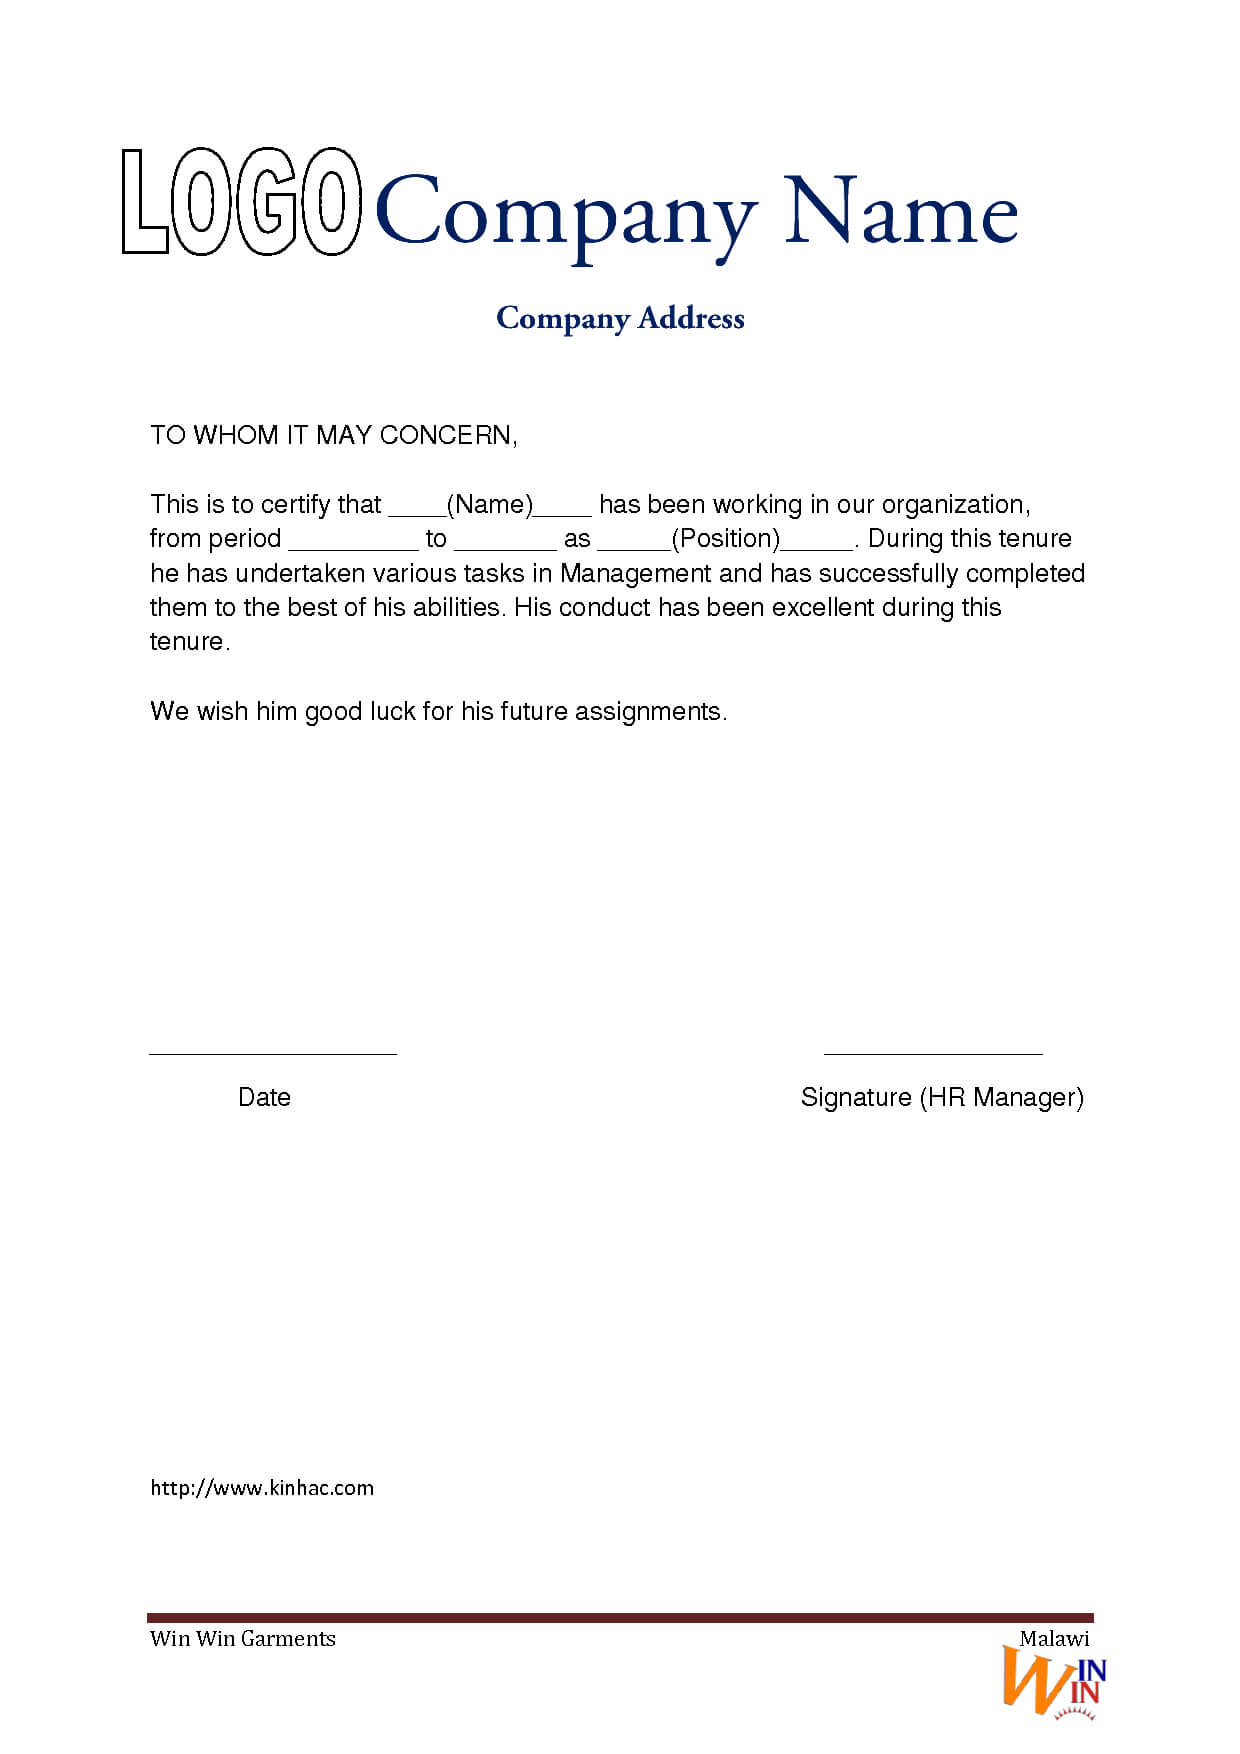 Blank Job Experience Letter Template Example Free Download With Regard To Good Conduct Certificate Template